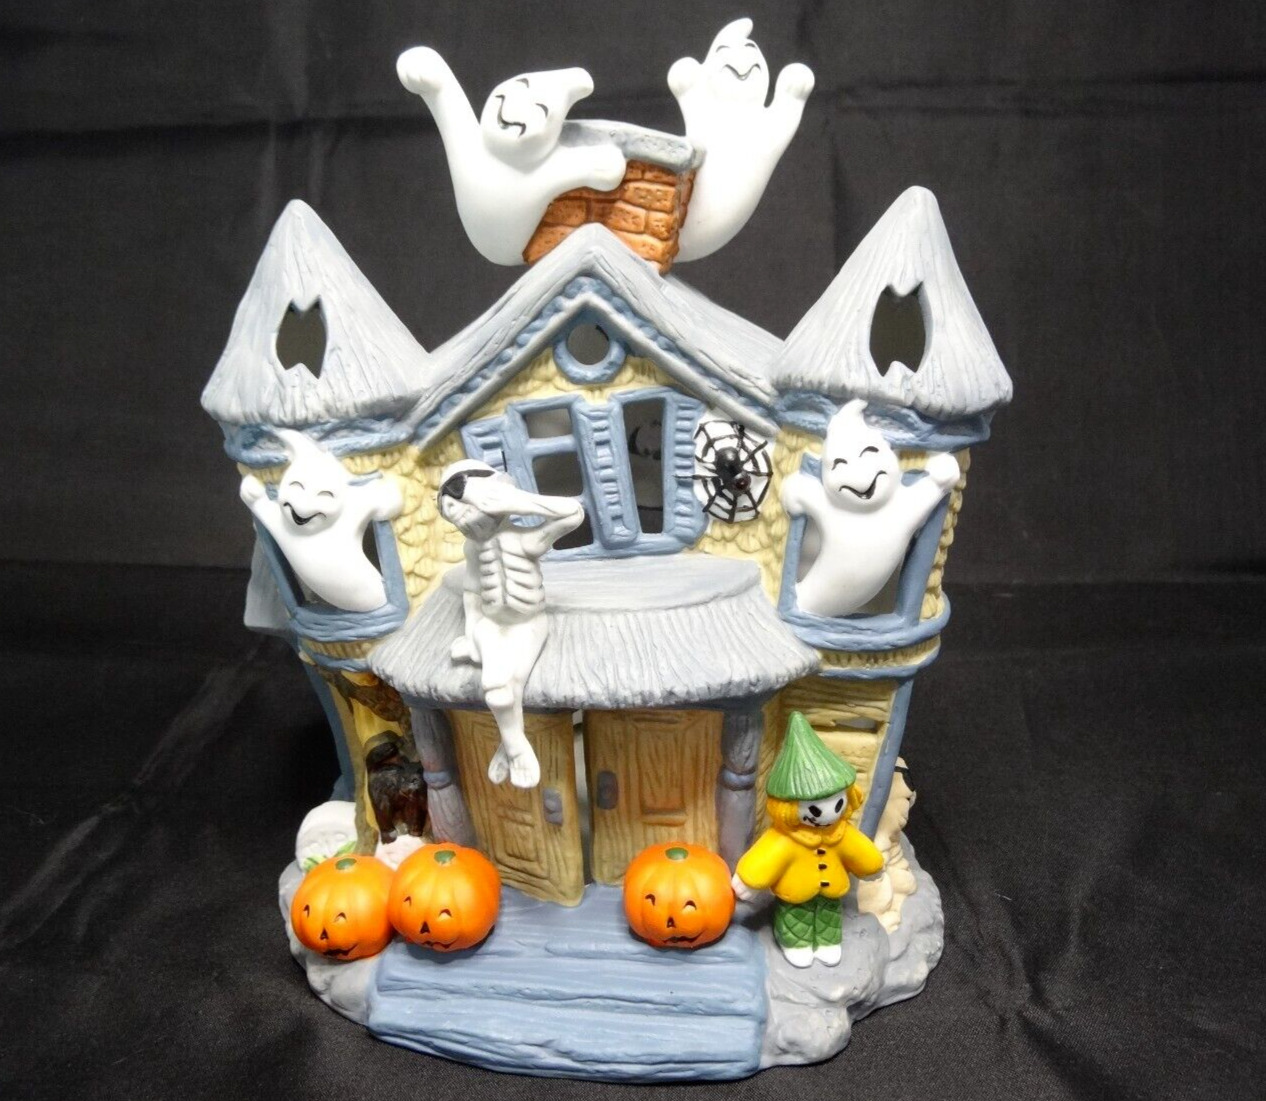 VTG PartyLite Halloween Ceramic Haunted Tealight House Candle Holder